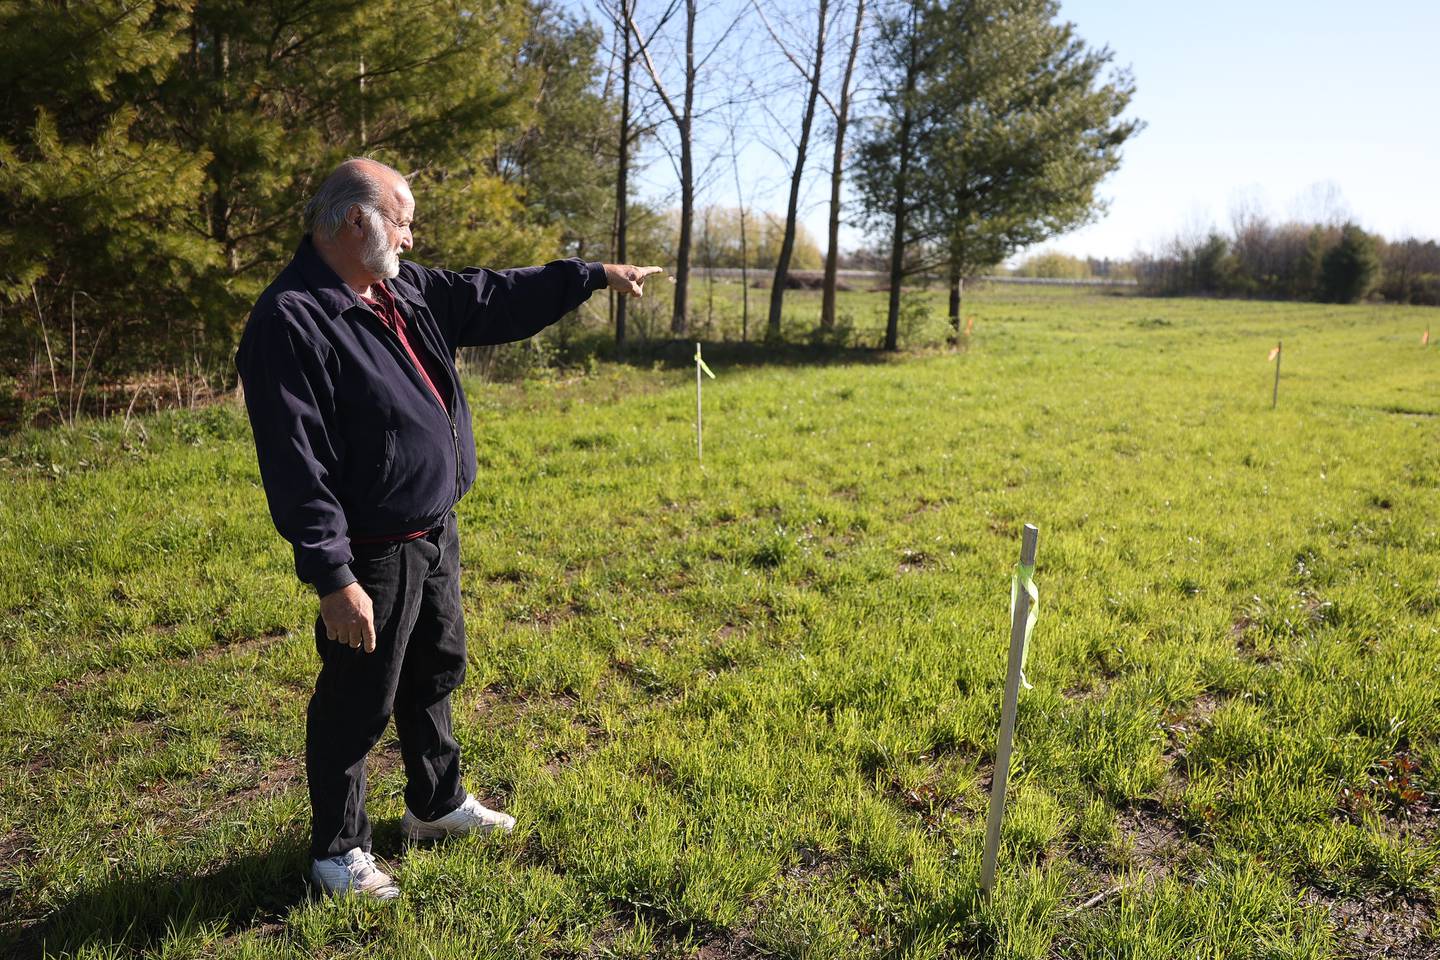 Mistie Hill Vineyard owner Rich Strylowski points to the area that the new wine tasting and processing building will be built on Saturday, April 13 in Custer Park.